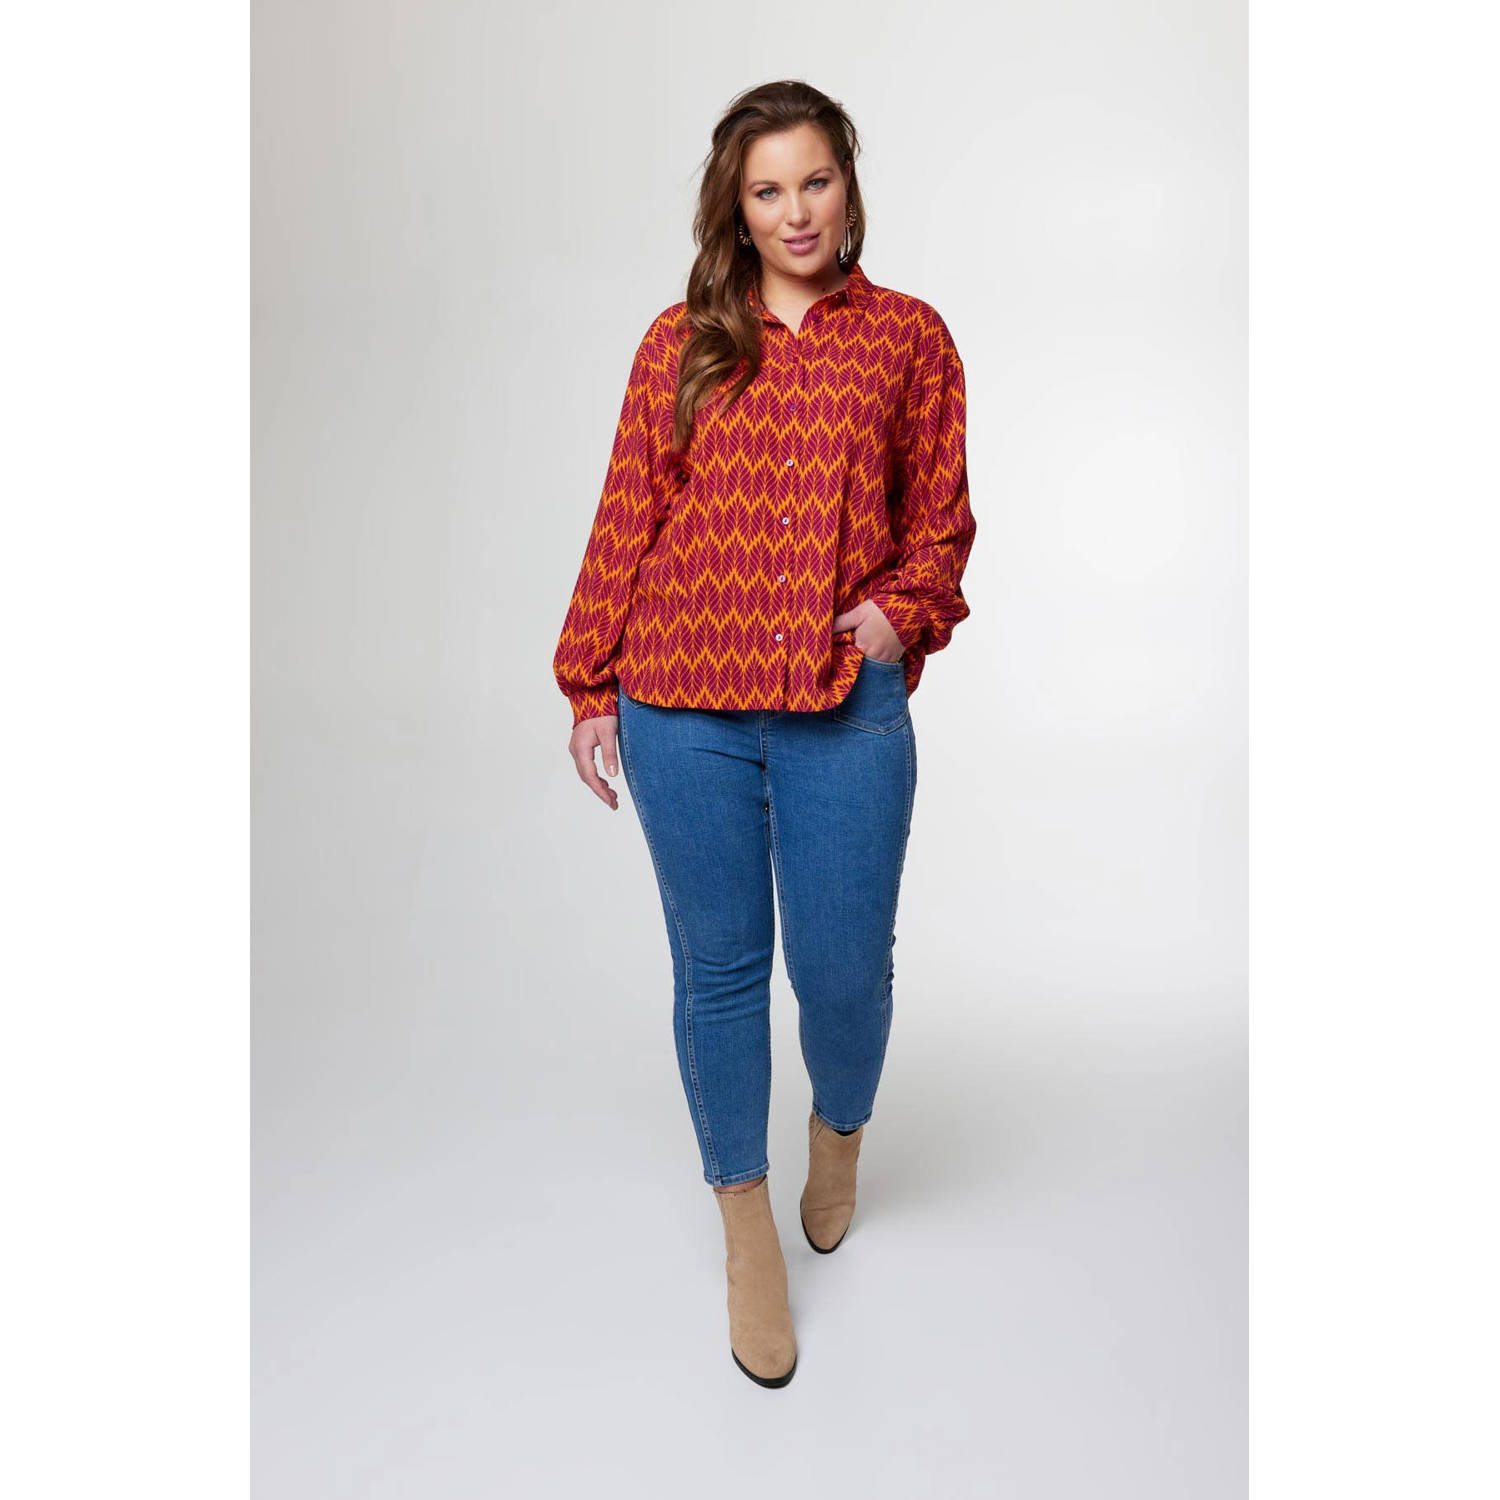 MS Mode blouse met all over print oranjerood